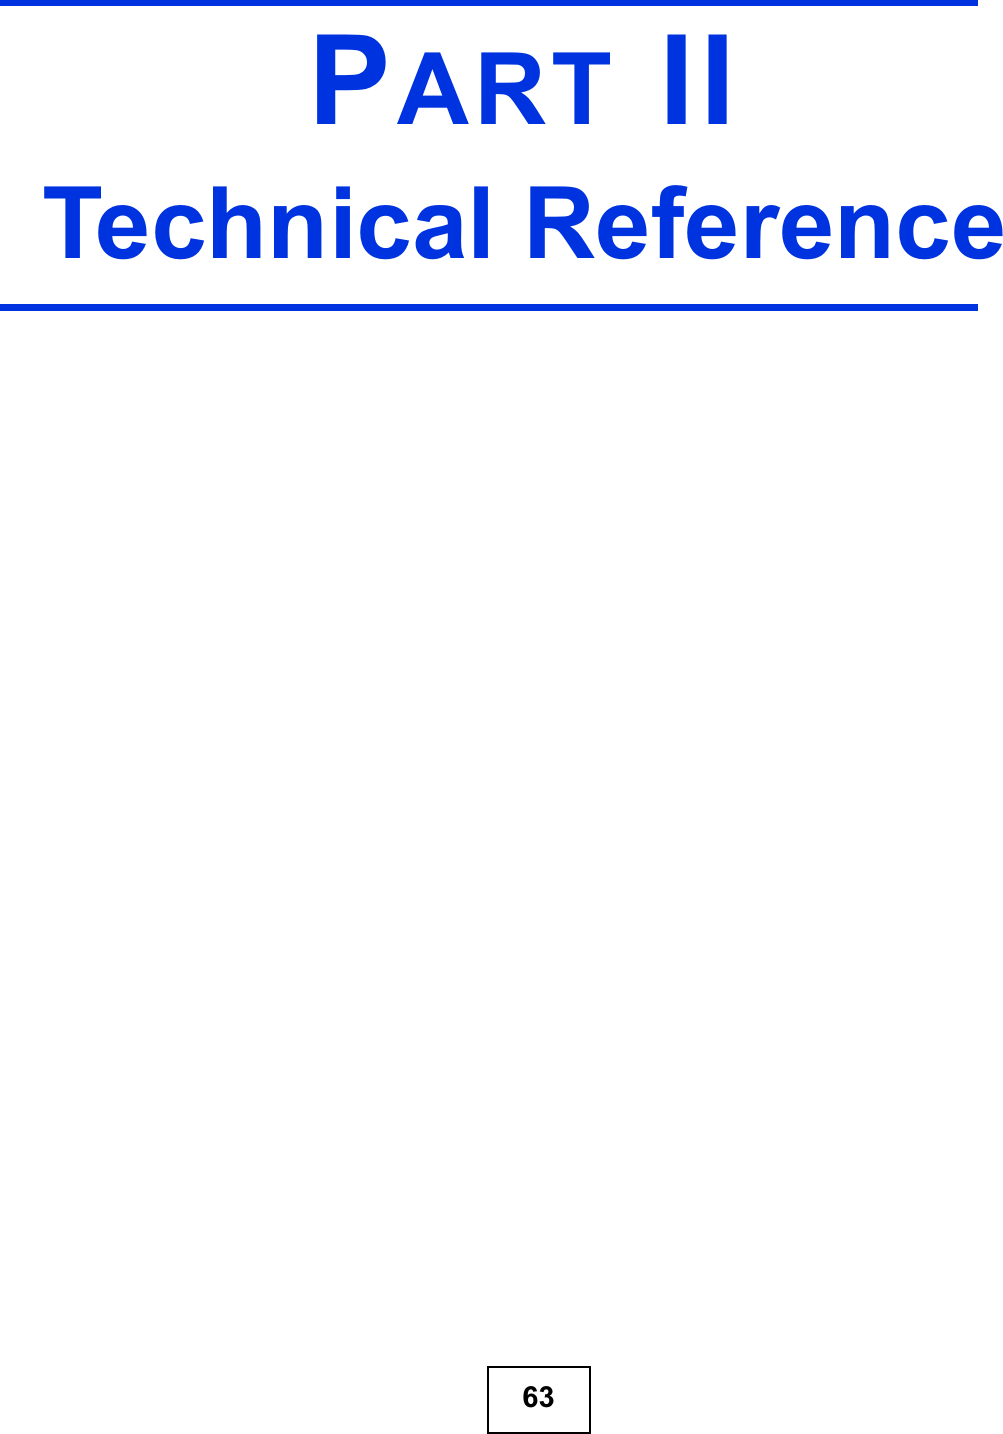 63PART IITechnical Reference